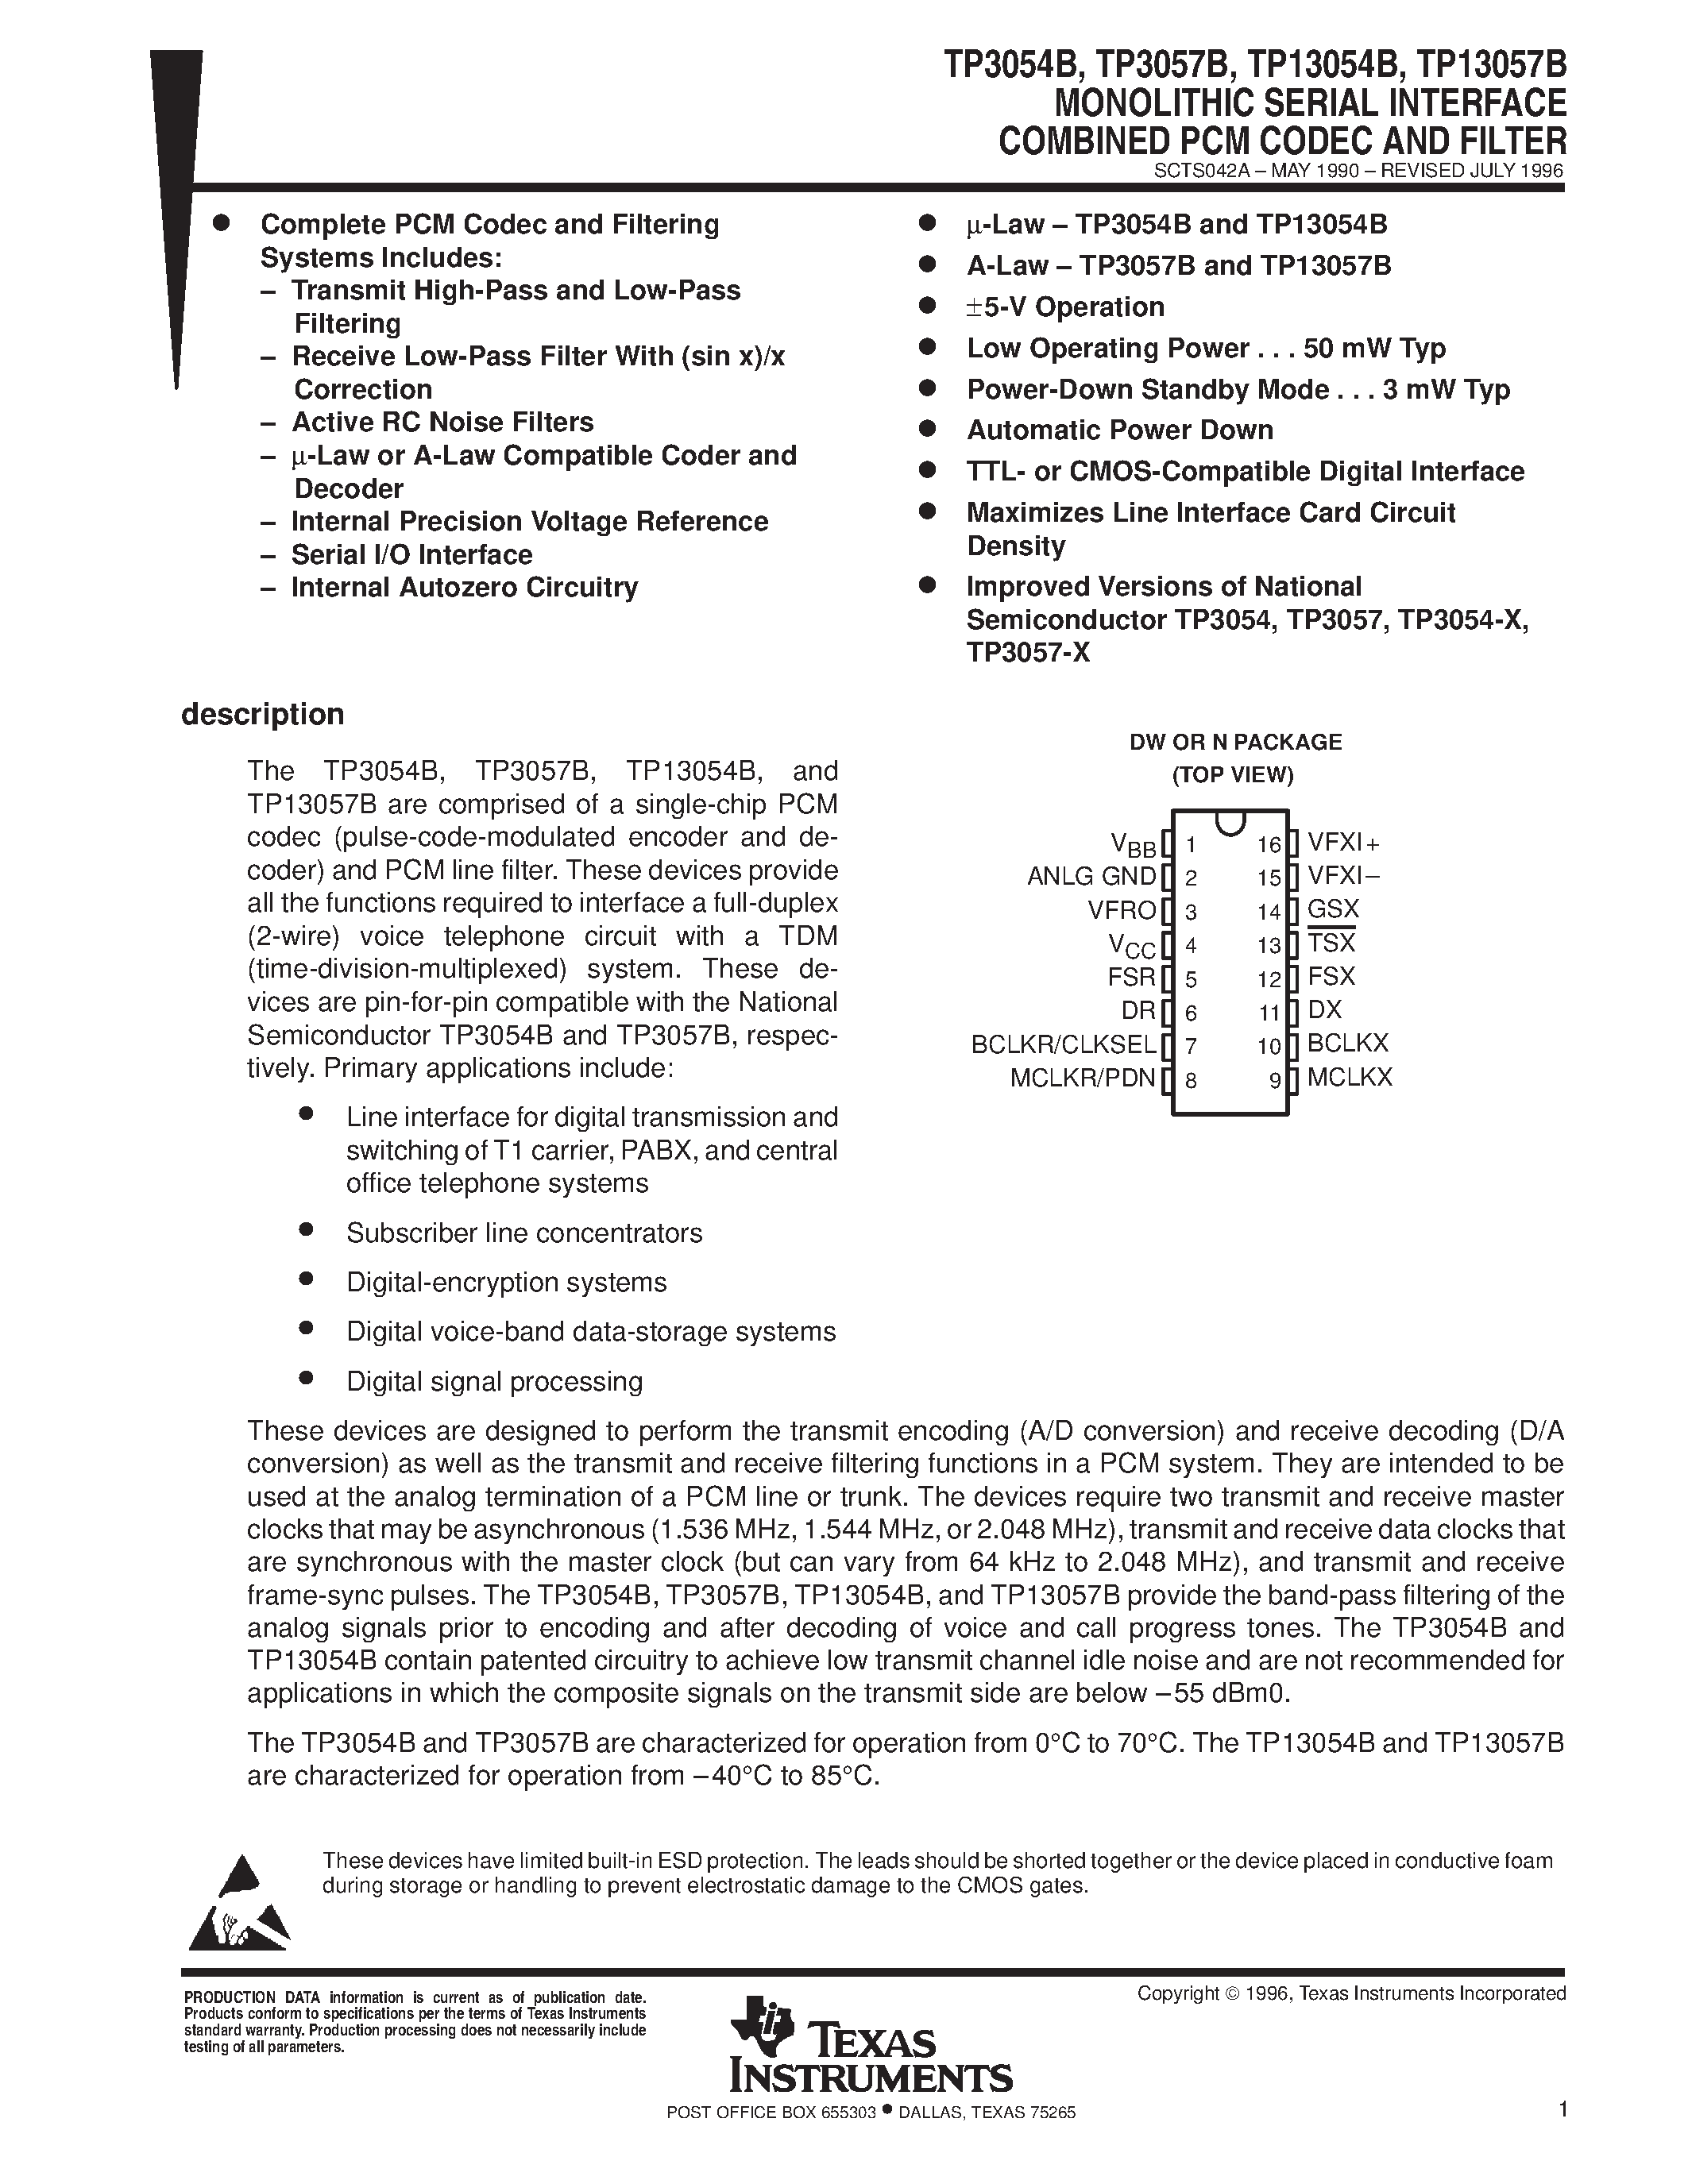 Datasheet TP13057BDW - MONOLITHIC SERIAL INTERFACE COMBINED PCM CODEC AND FILTER page 1